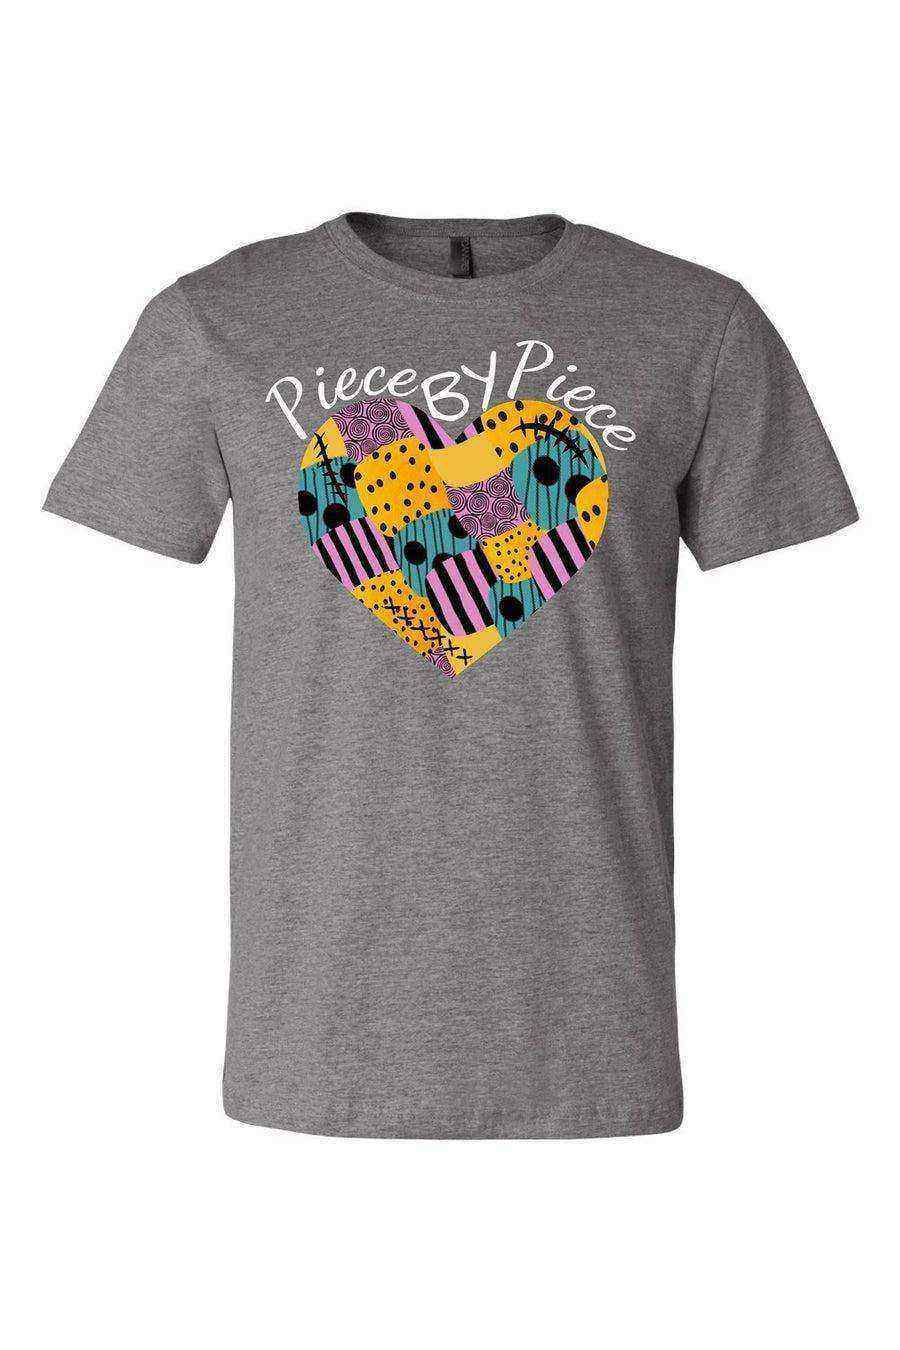 Piece By Piece Shirt | Nightmare Before Christmas | Sally Shirt - Dylan's Tees